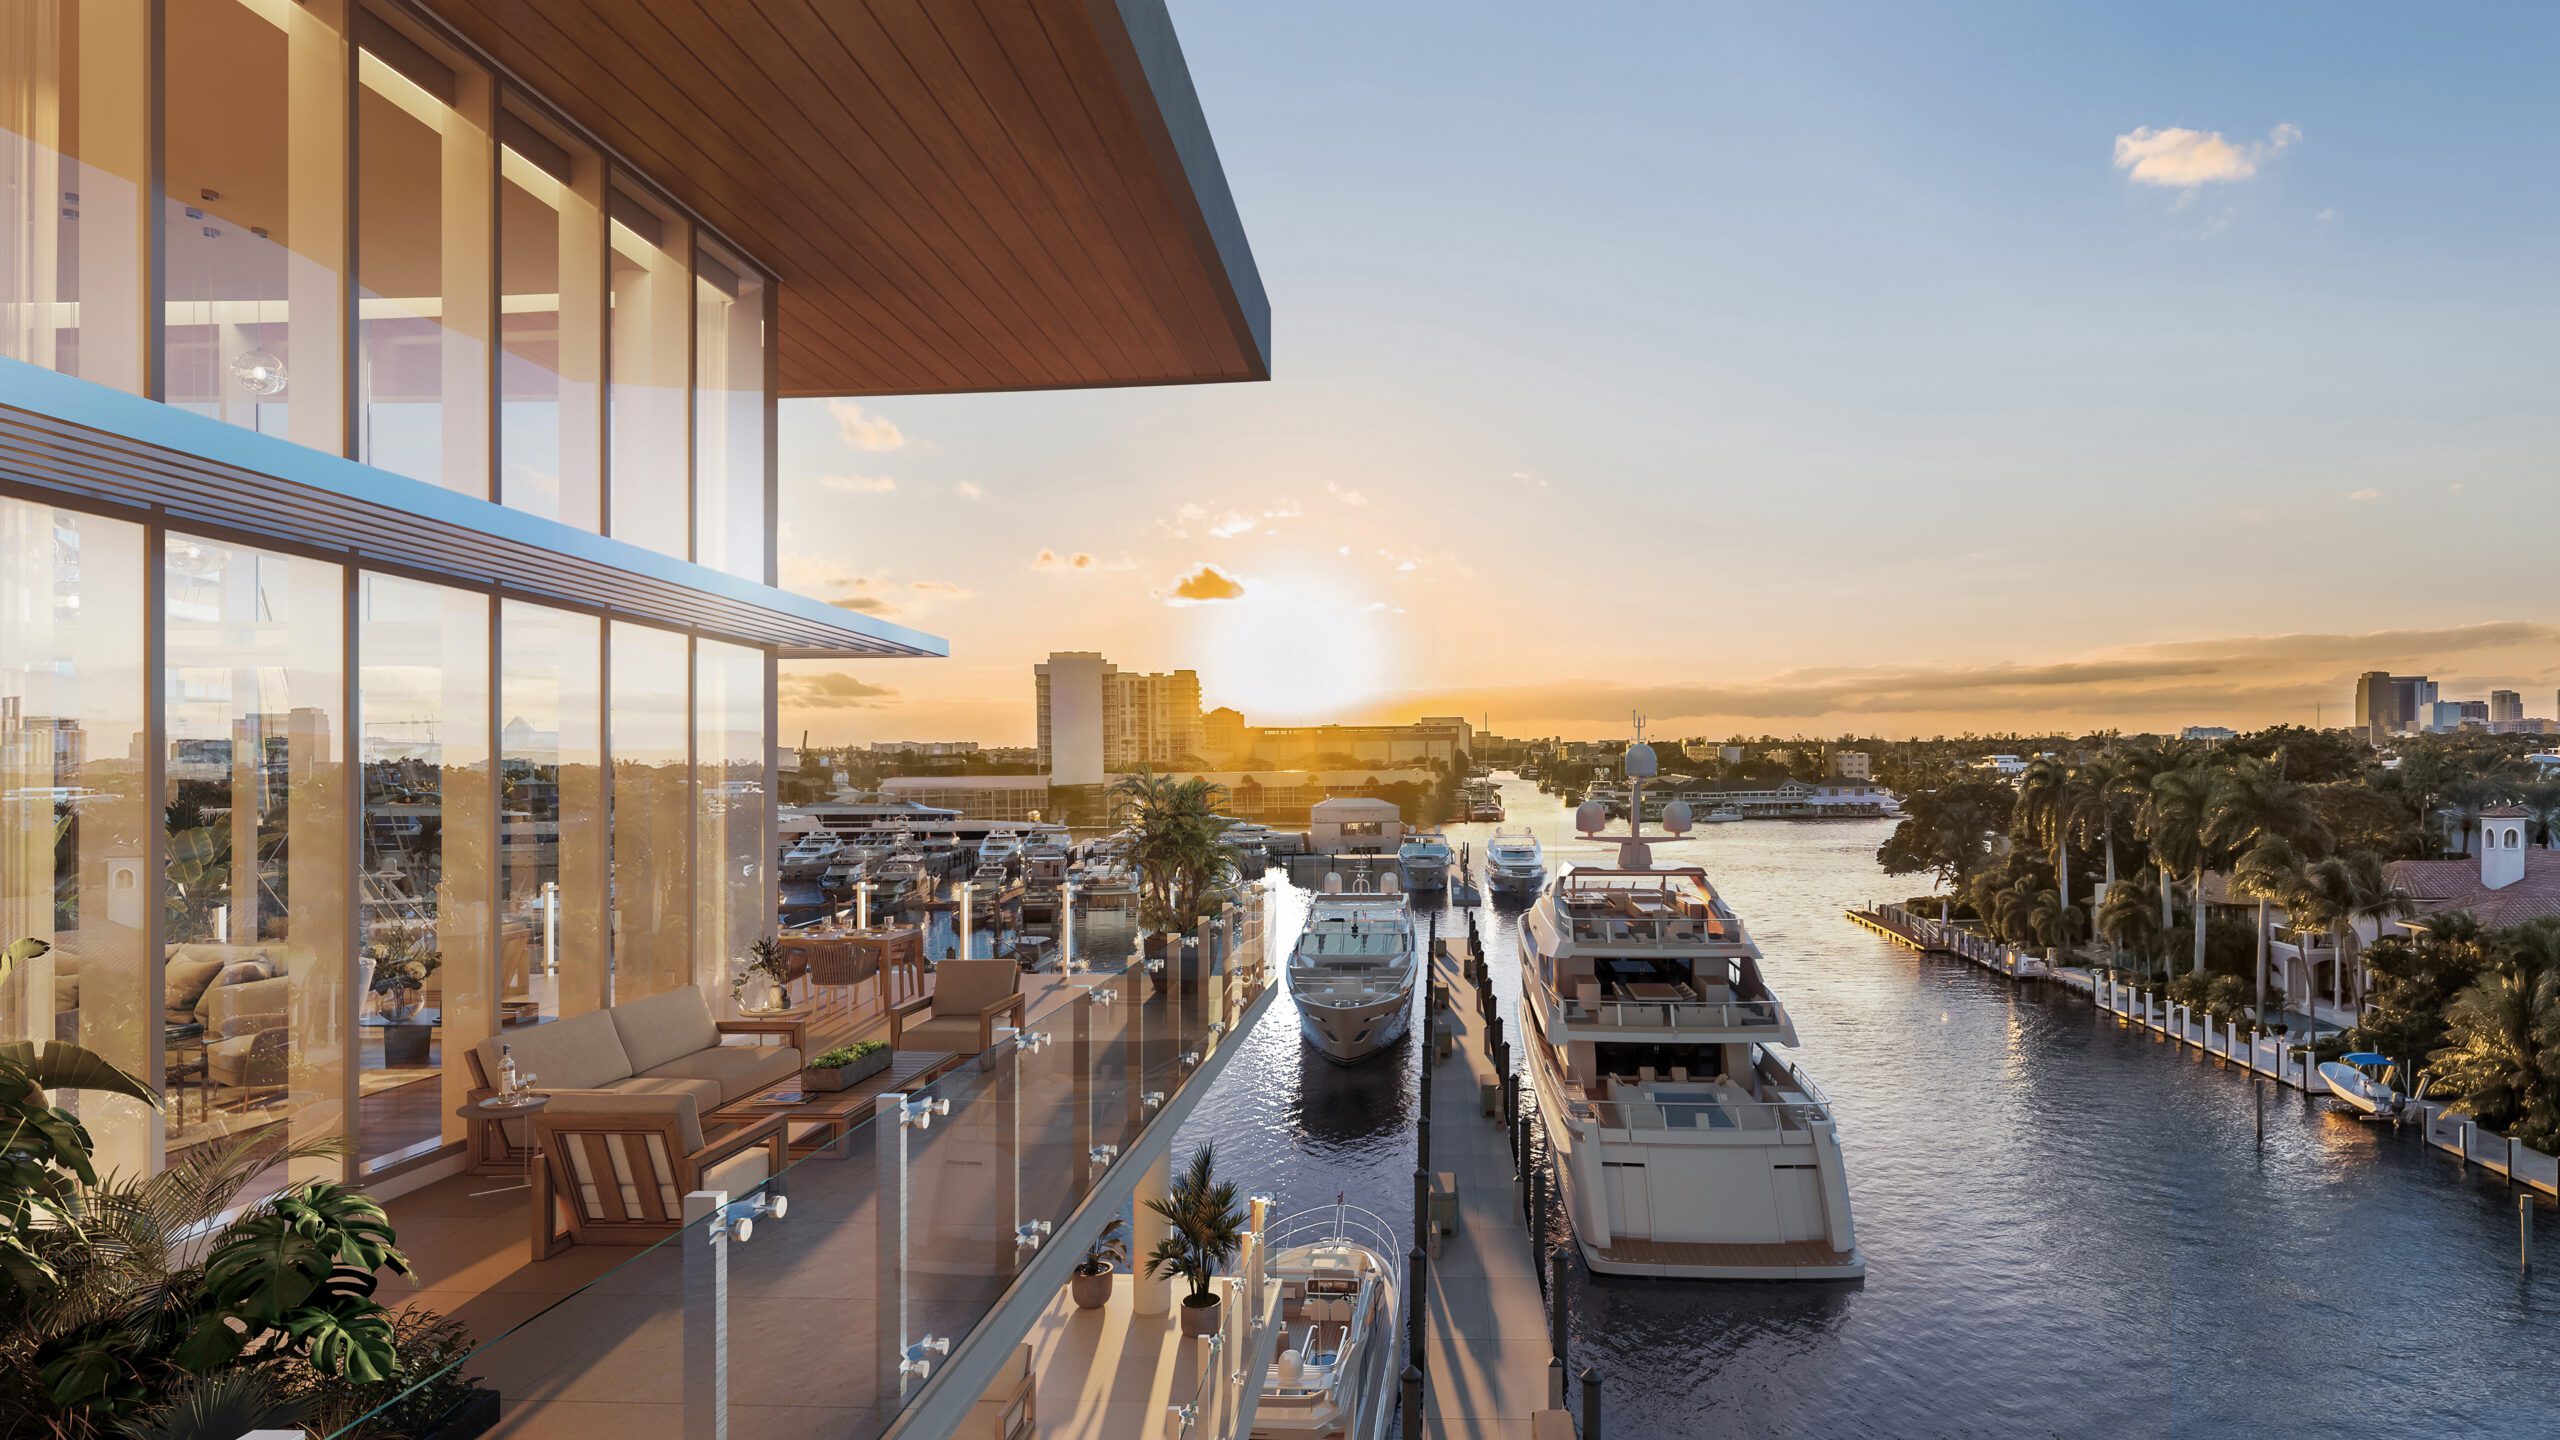 Fort Lauderdale Luxury Condos: A Prime Investment for High-End Urban Living